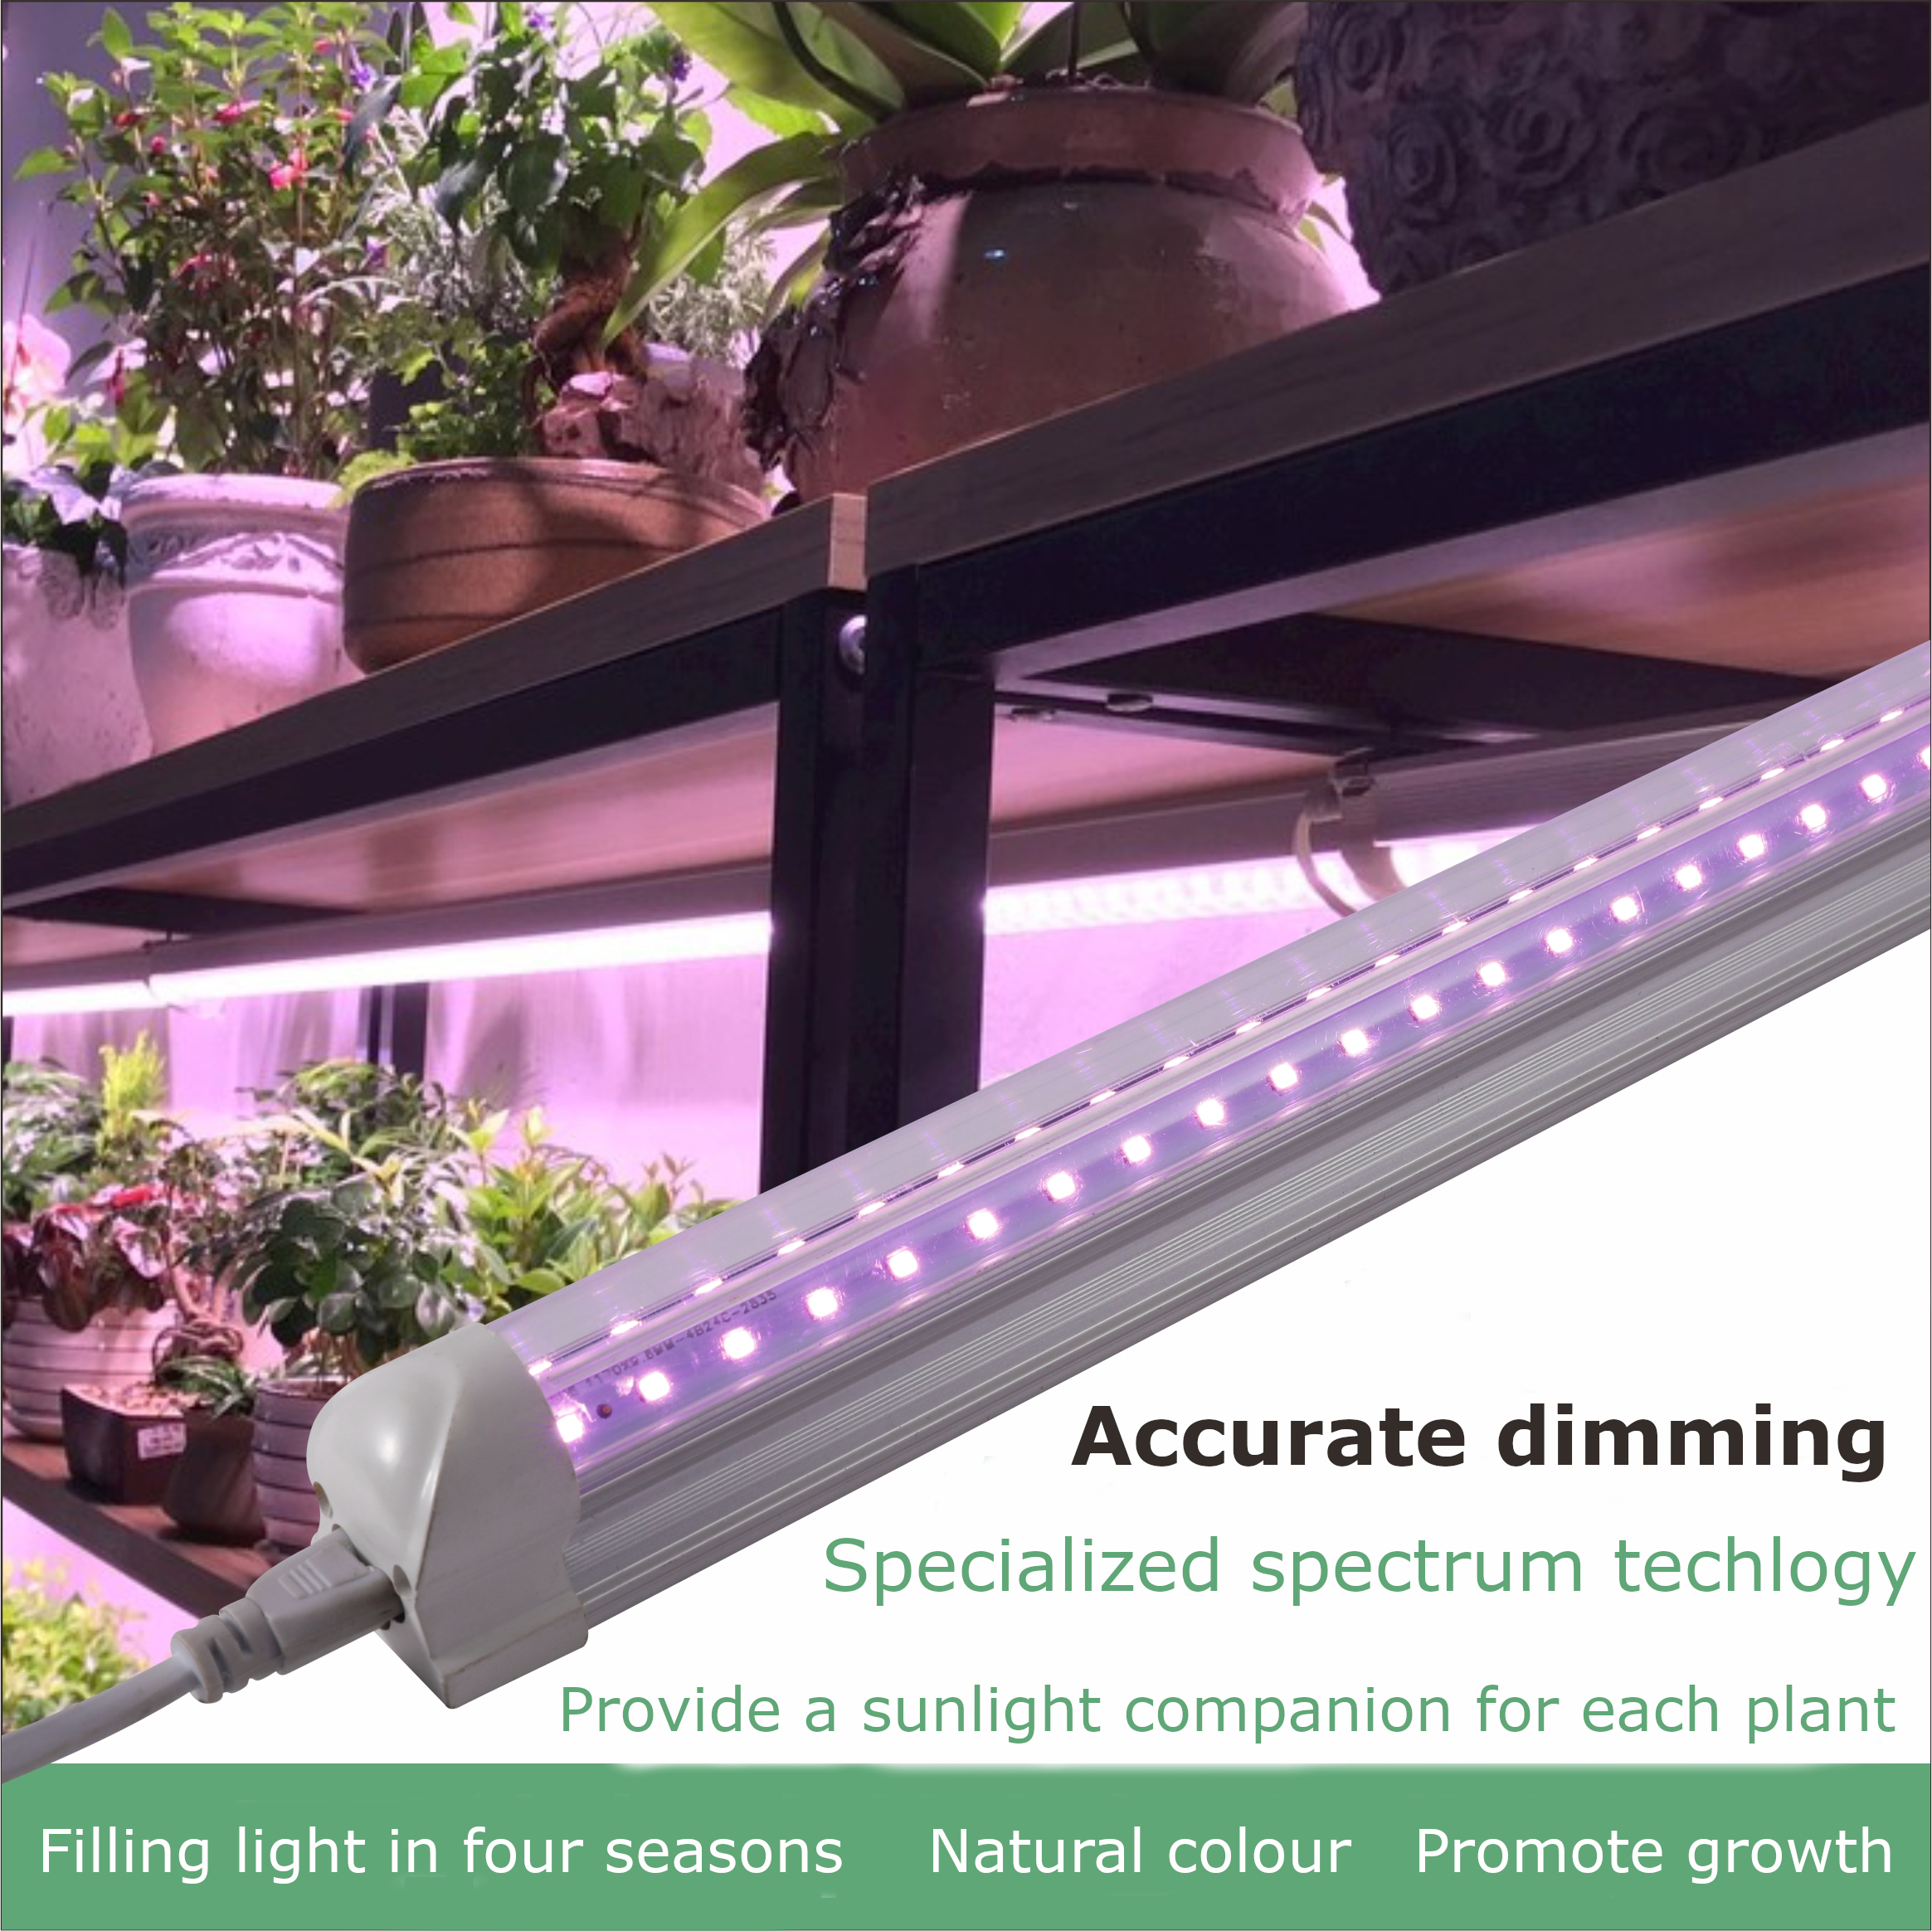 Led  plant grow tube light T8 1200mm with New Diodes & IR Lights Full Spectrum Veg Bloom Growing Lamps for Indoor Plants Seeding Flower Led Plant Light Fixture